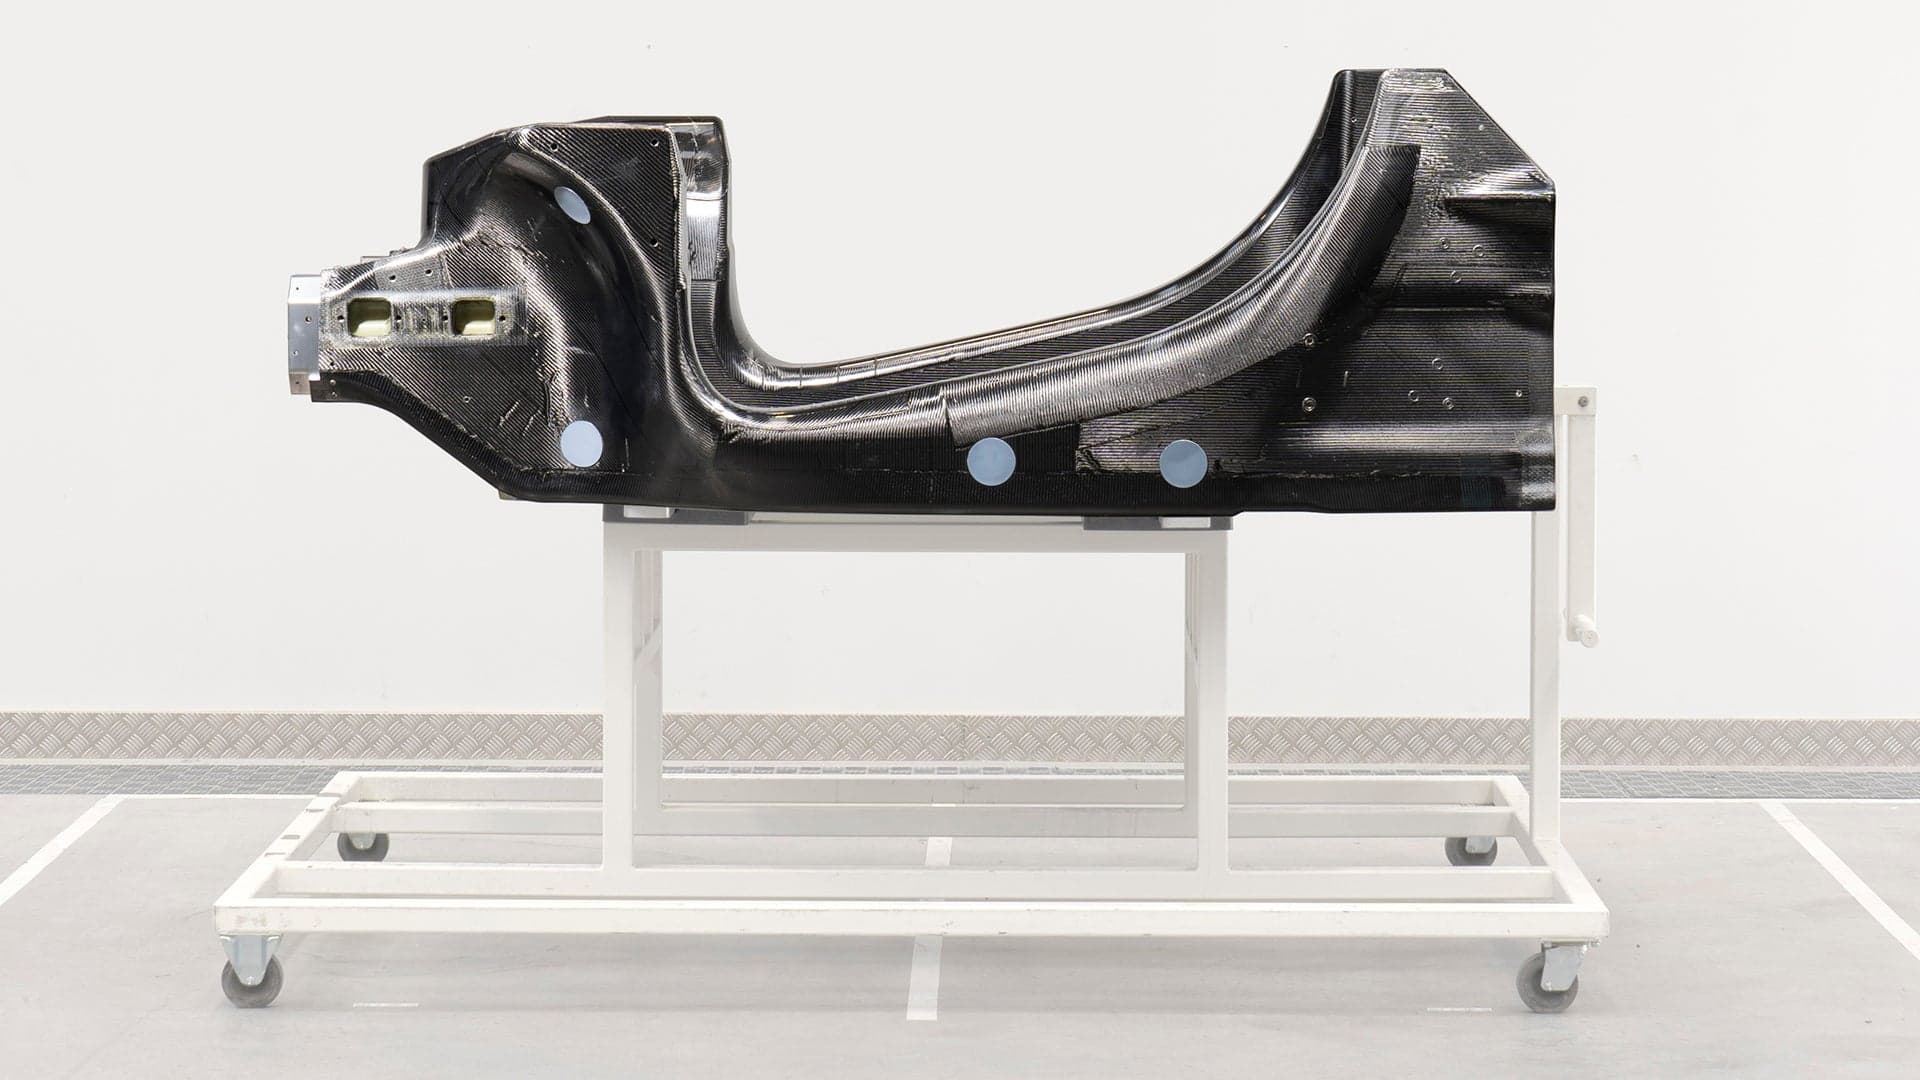 McLaren’s Upcoming Hybrid Supercars Will Sit on This Newly Developed Carbon Fiber Tub